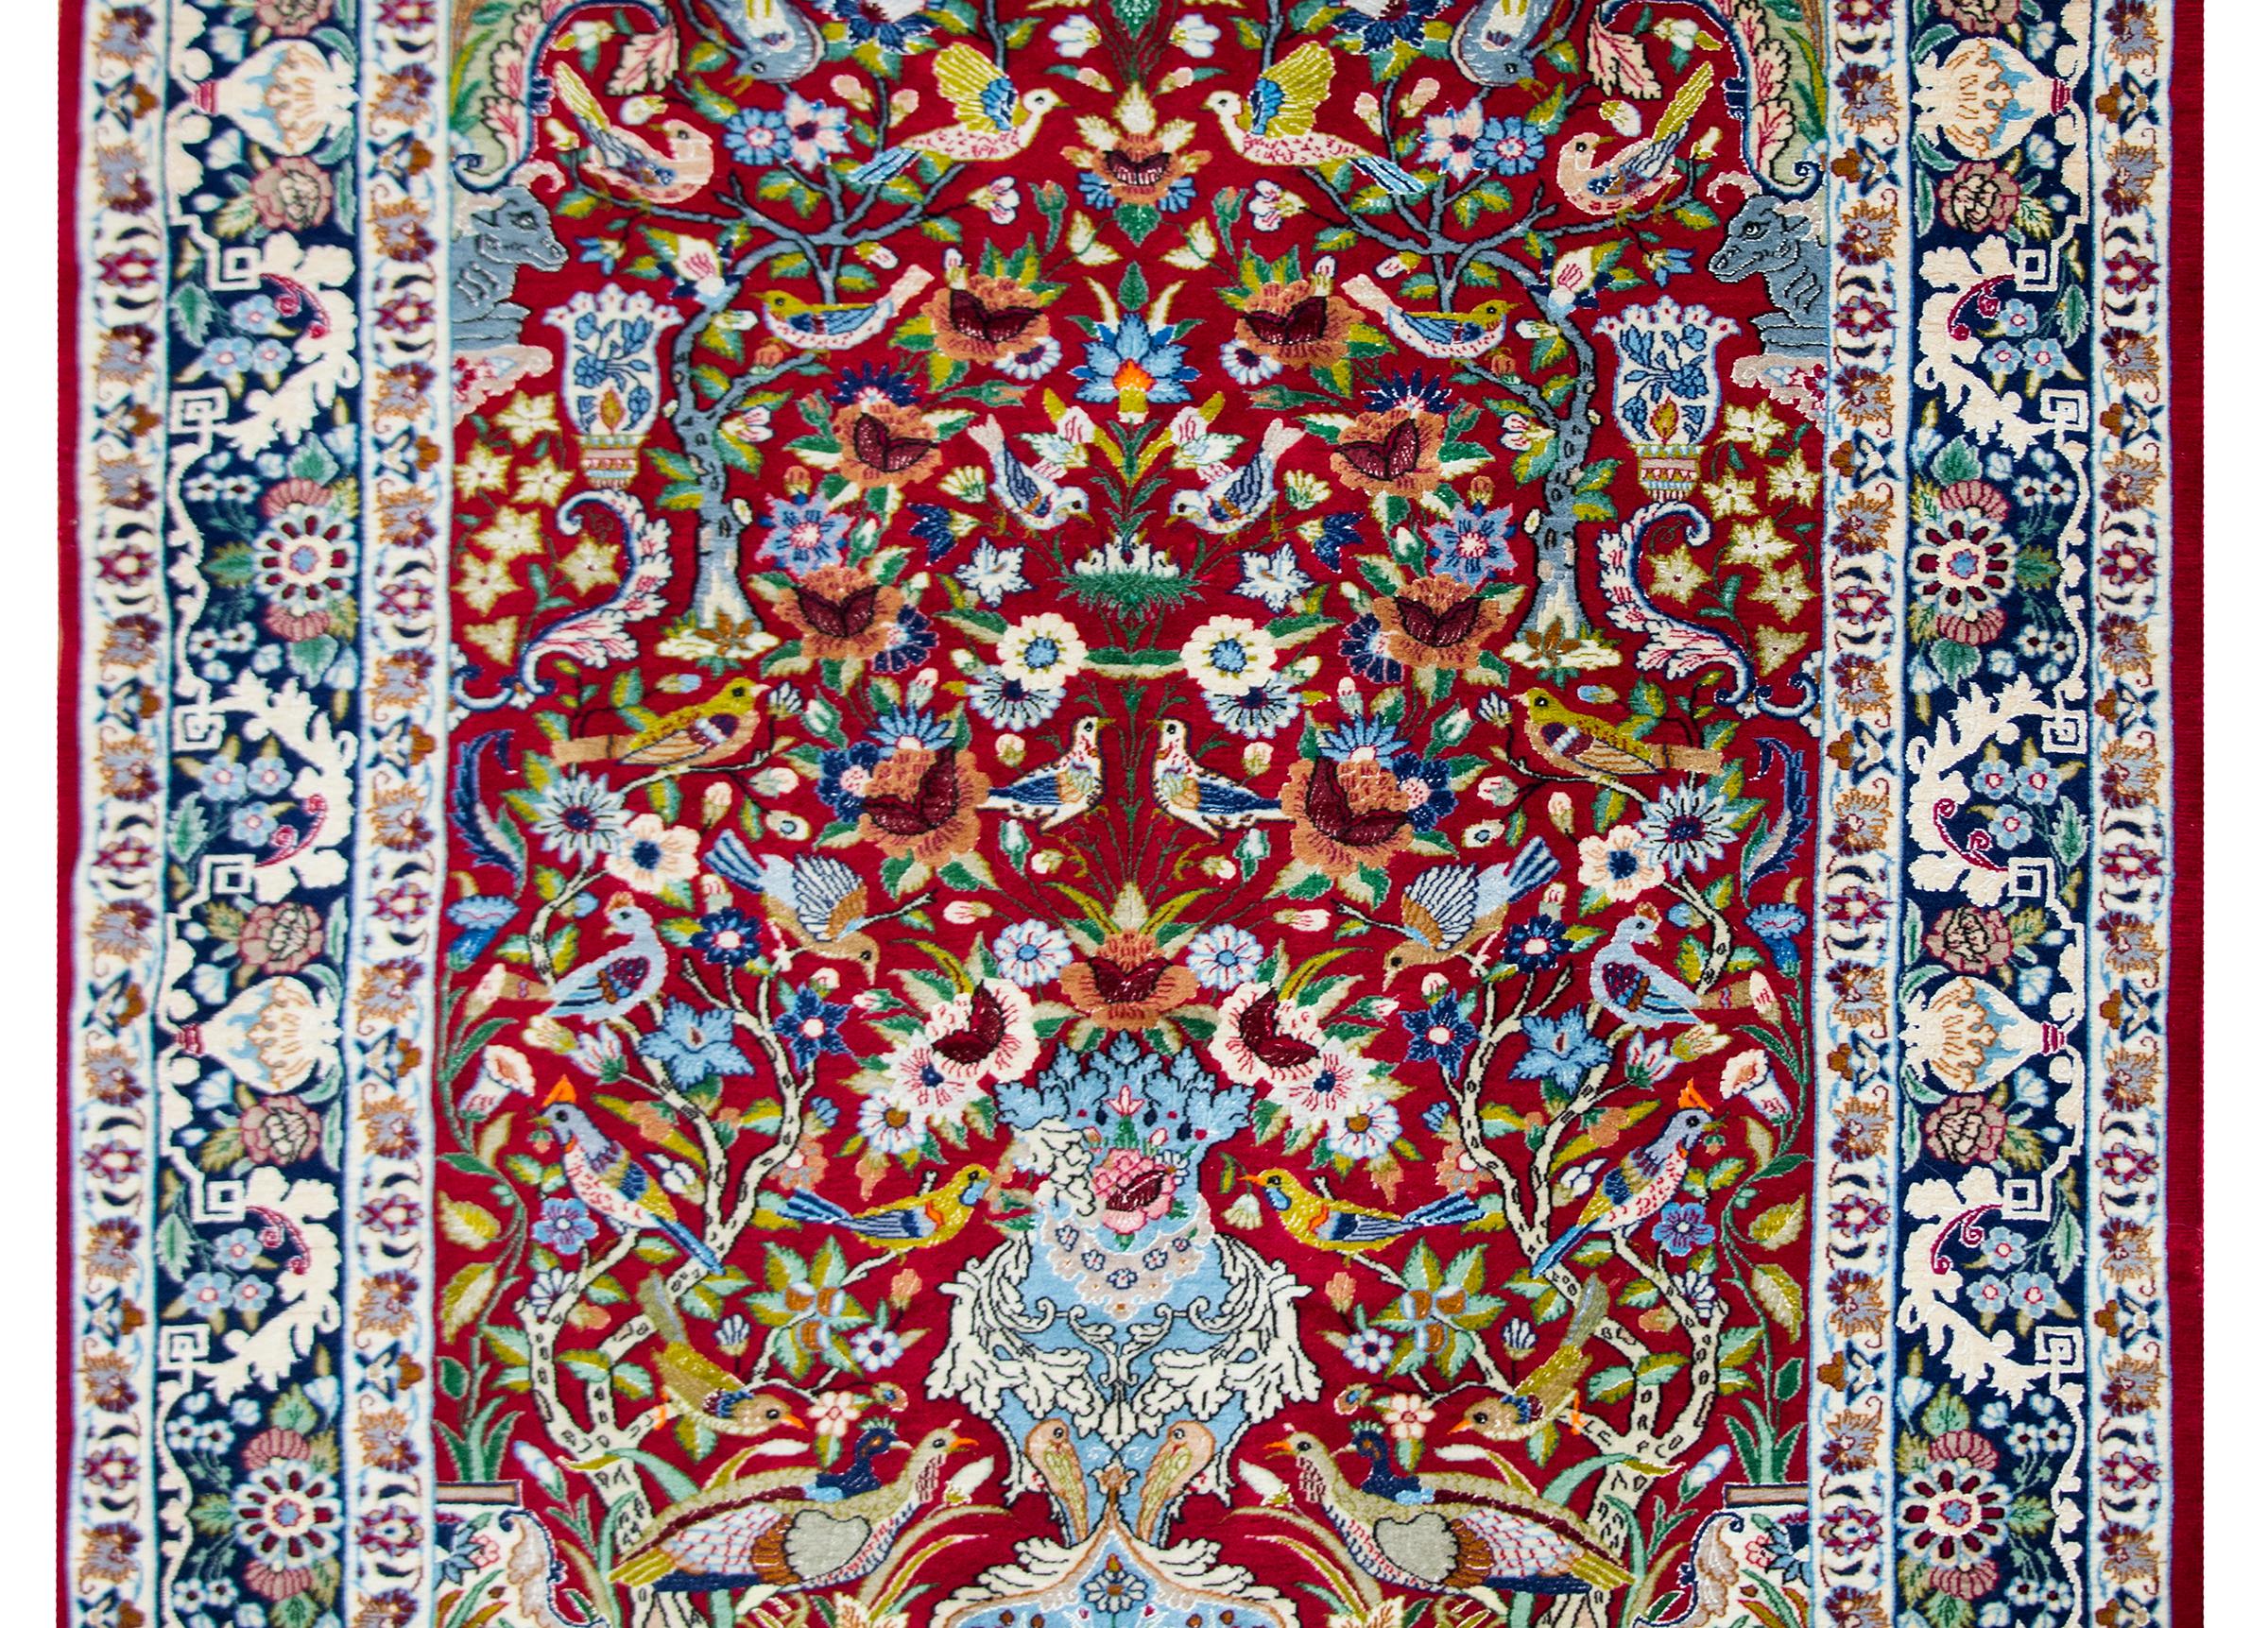 A wonderful late 20th century Persian Isfahan rug with a large central vase sprouting a tree-of-life with myriad flowers and birds, surrounded by a wide border with a large floral and leaf pattern flanked by pairs of thinner floral partnered